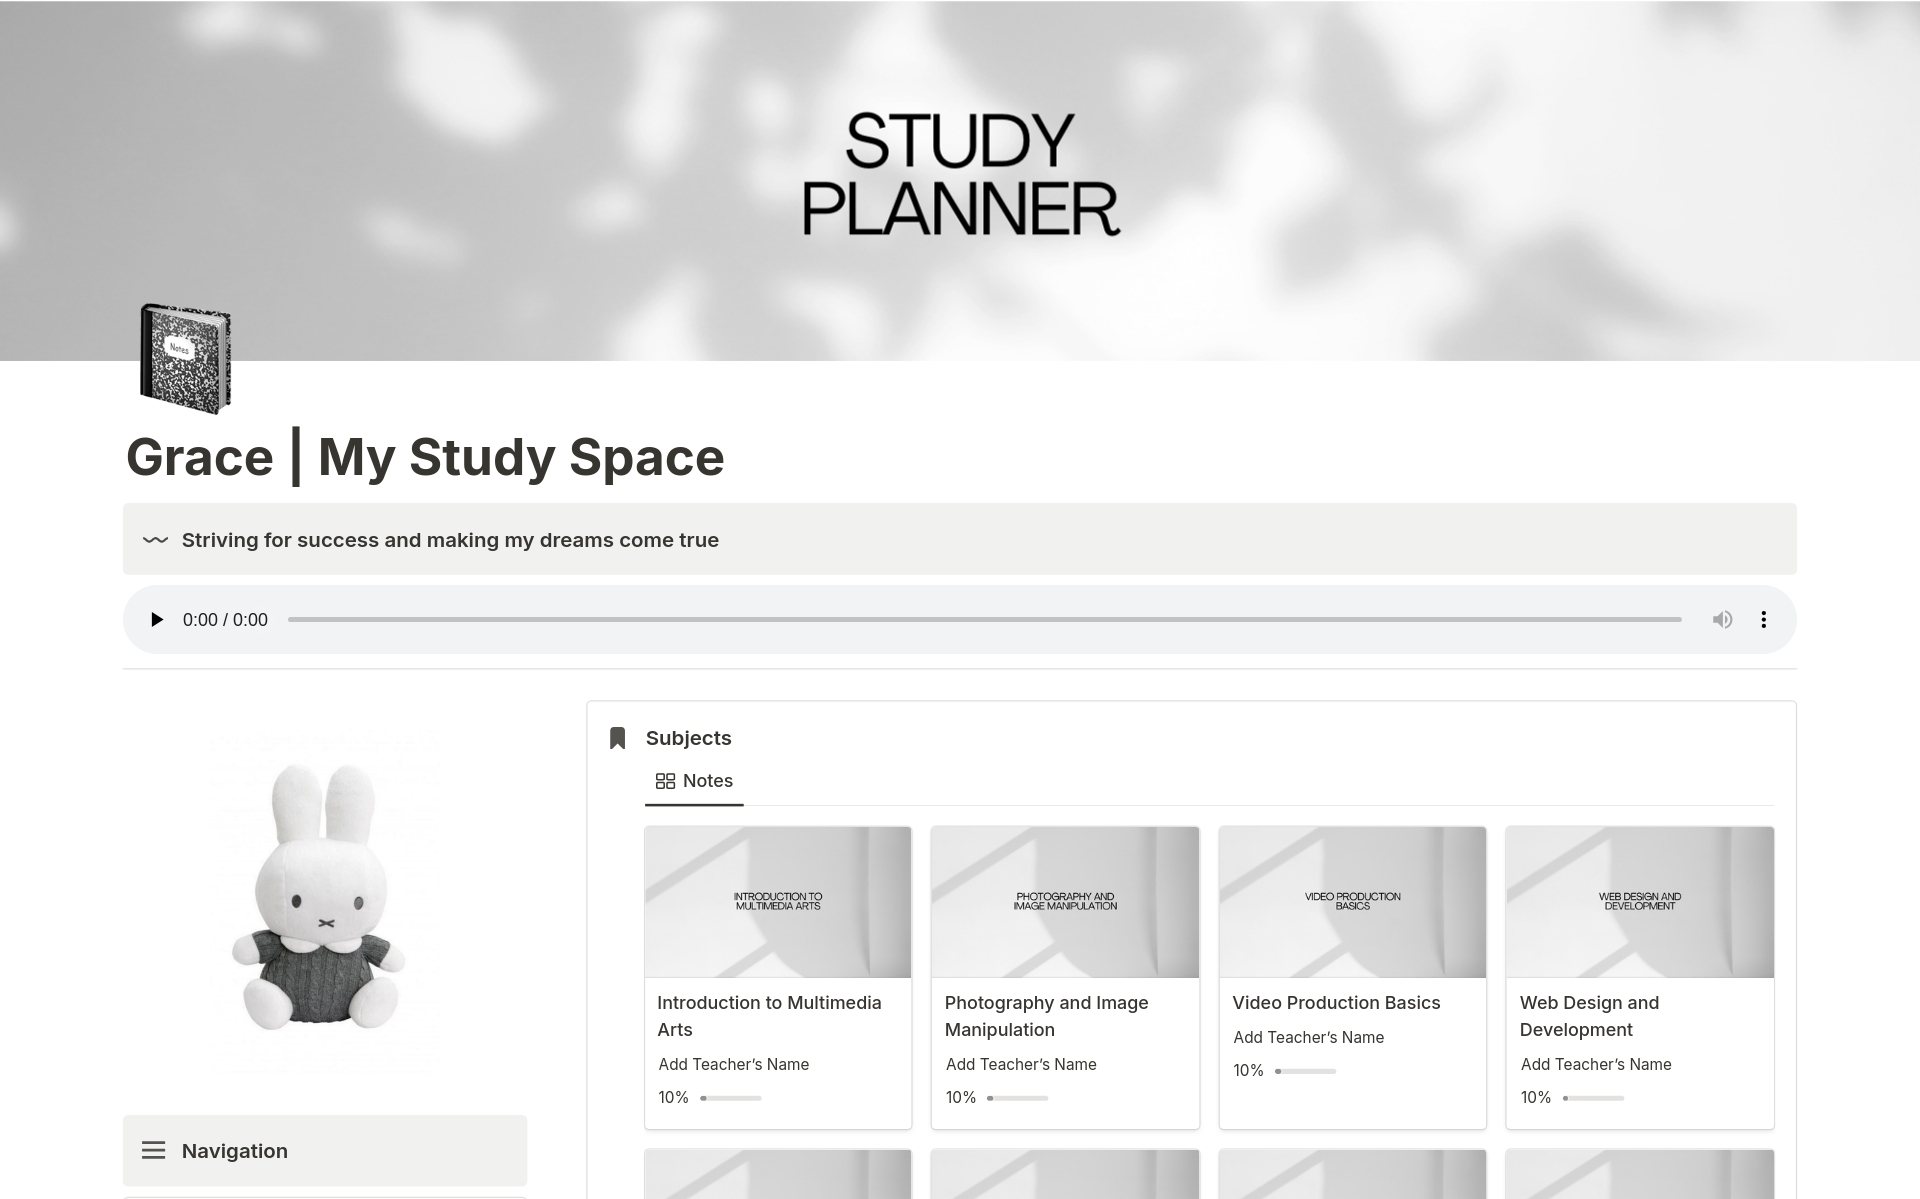 Messy files? Worry no more! Track your schoolwork and organize your files! This advanced and improved planner has been created thoughtfully with all the important features to help students stay on track with their studies.